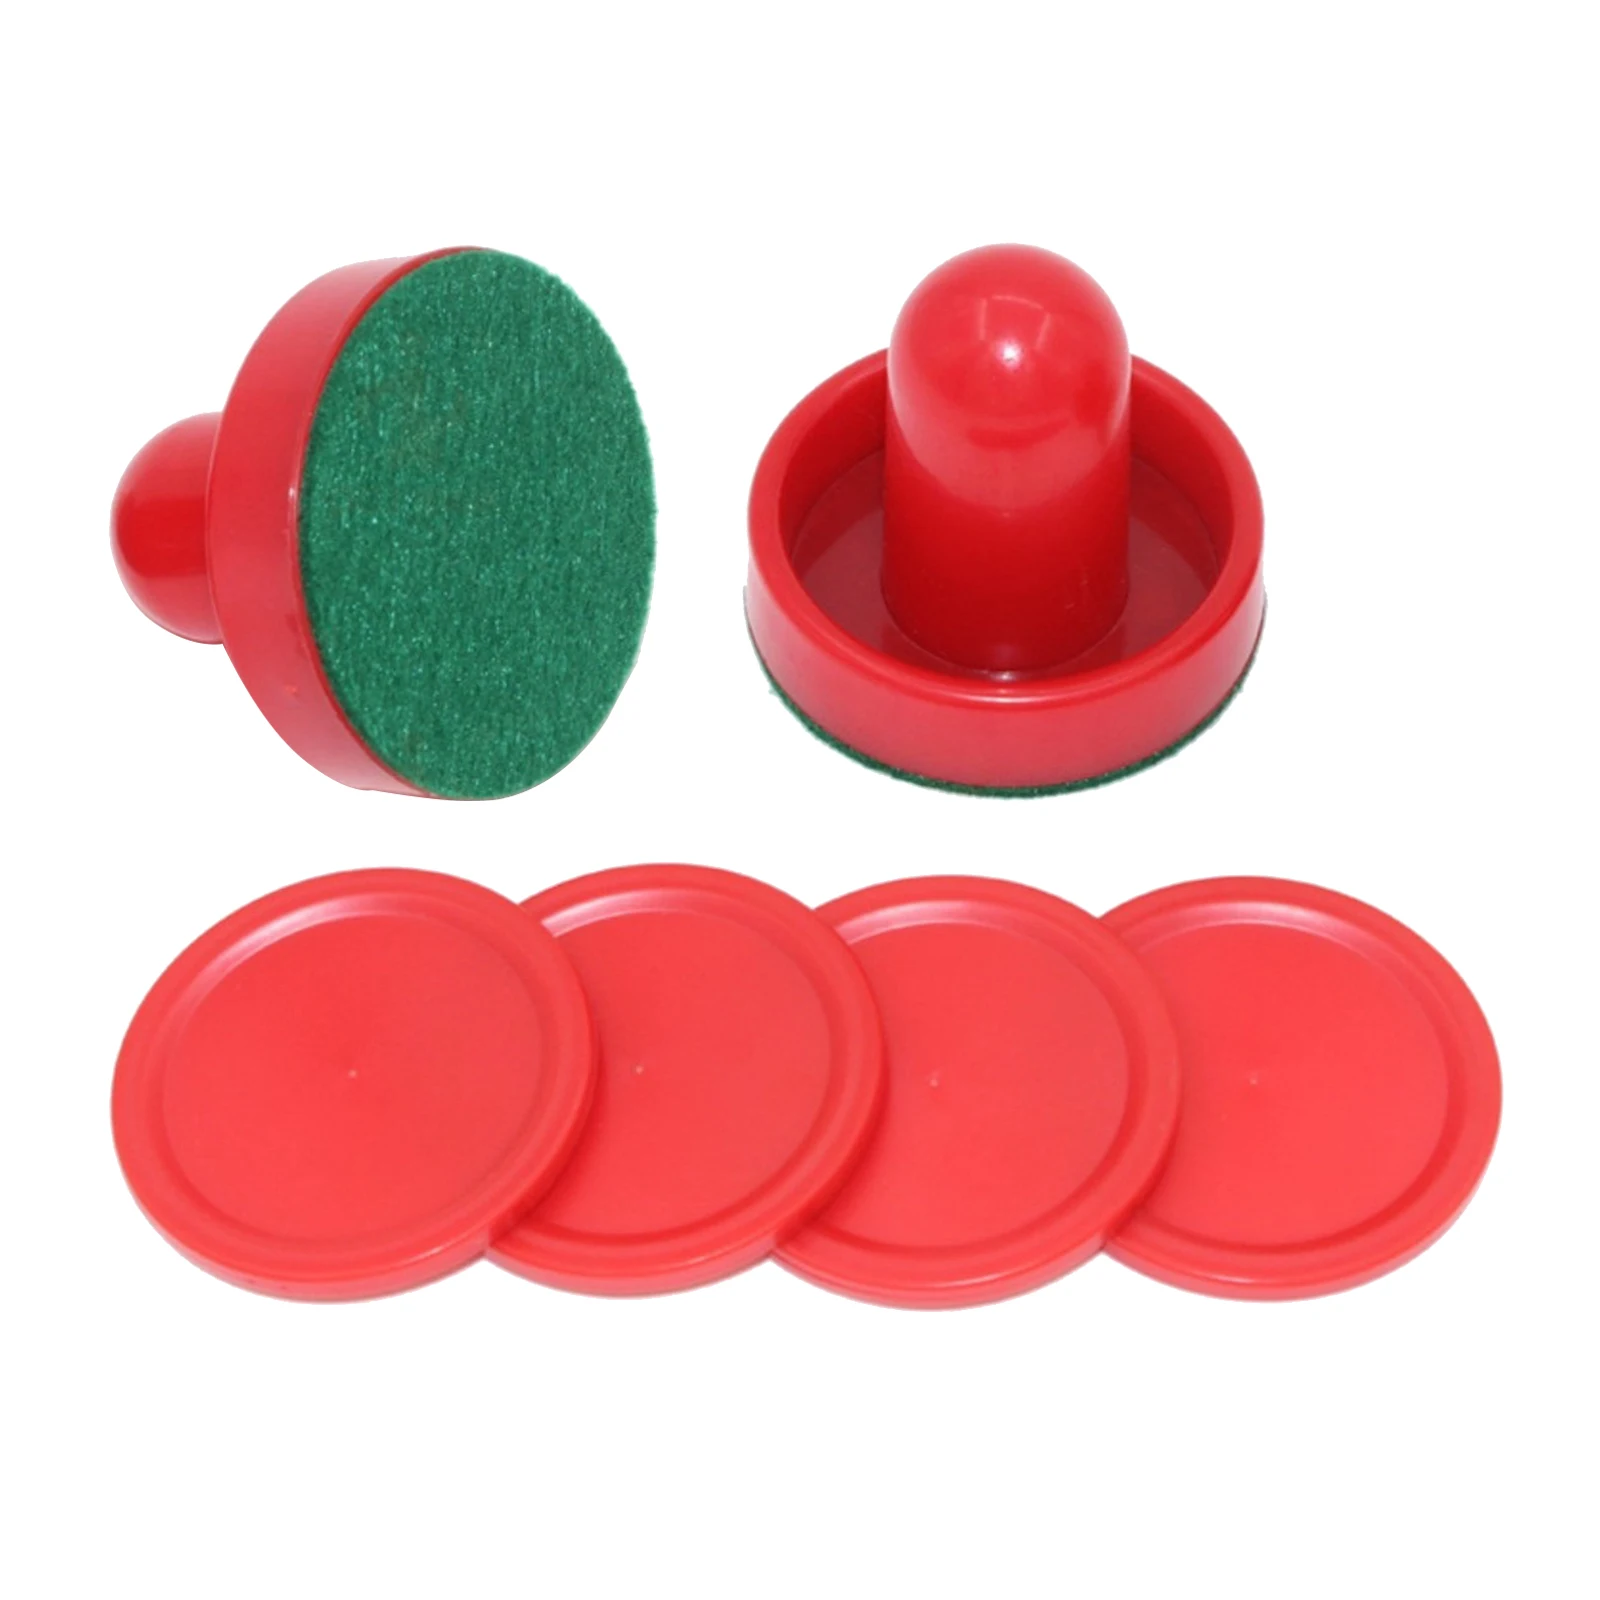 NEWMIND Air Hockey Paddles and Pucks Small Size for Kids Adult Great Goal Handles Pushers Replacement Accessories for Game Tables 